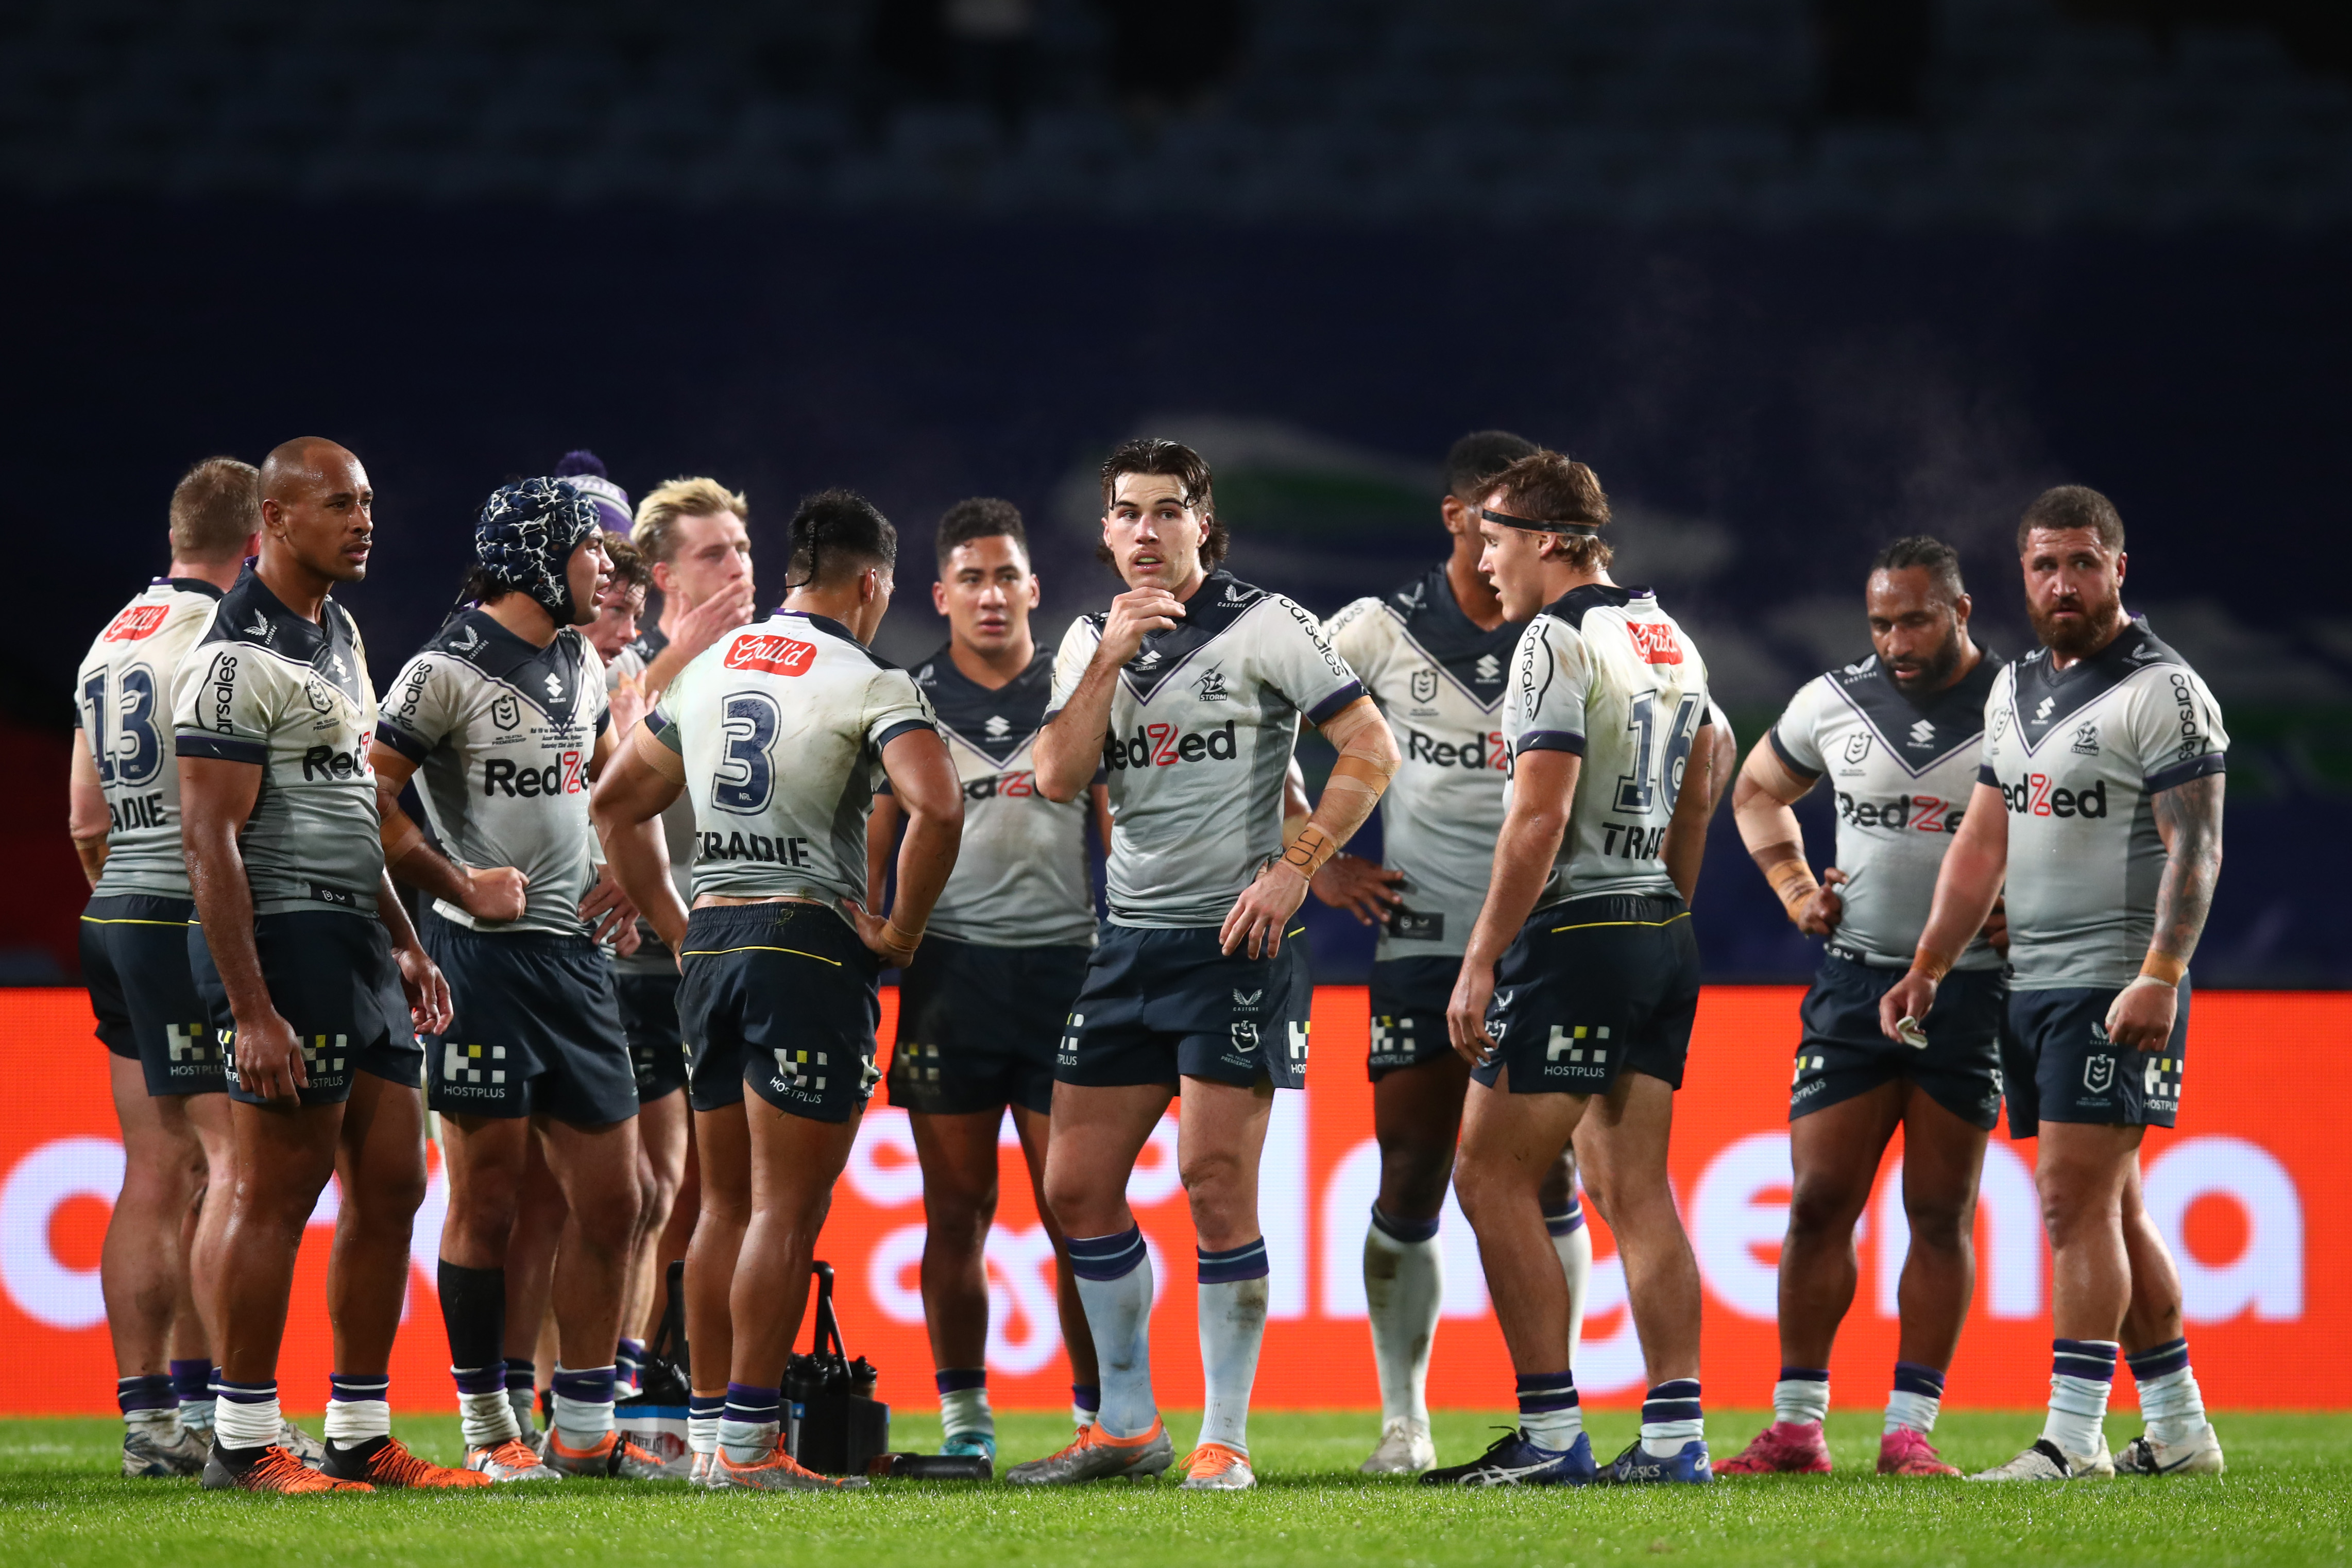 Storm players look on after conceding a try during the round 19 NRL match between the South Sydney Rabbitohs and the Melbourne Storm at Stadium Australia on July 23, 2022 in Sydney, Australia 